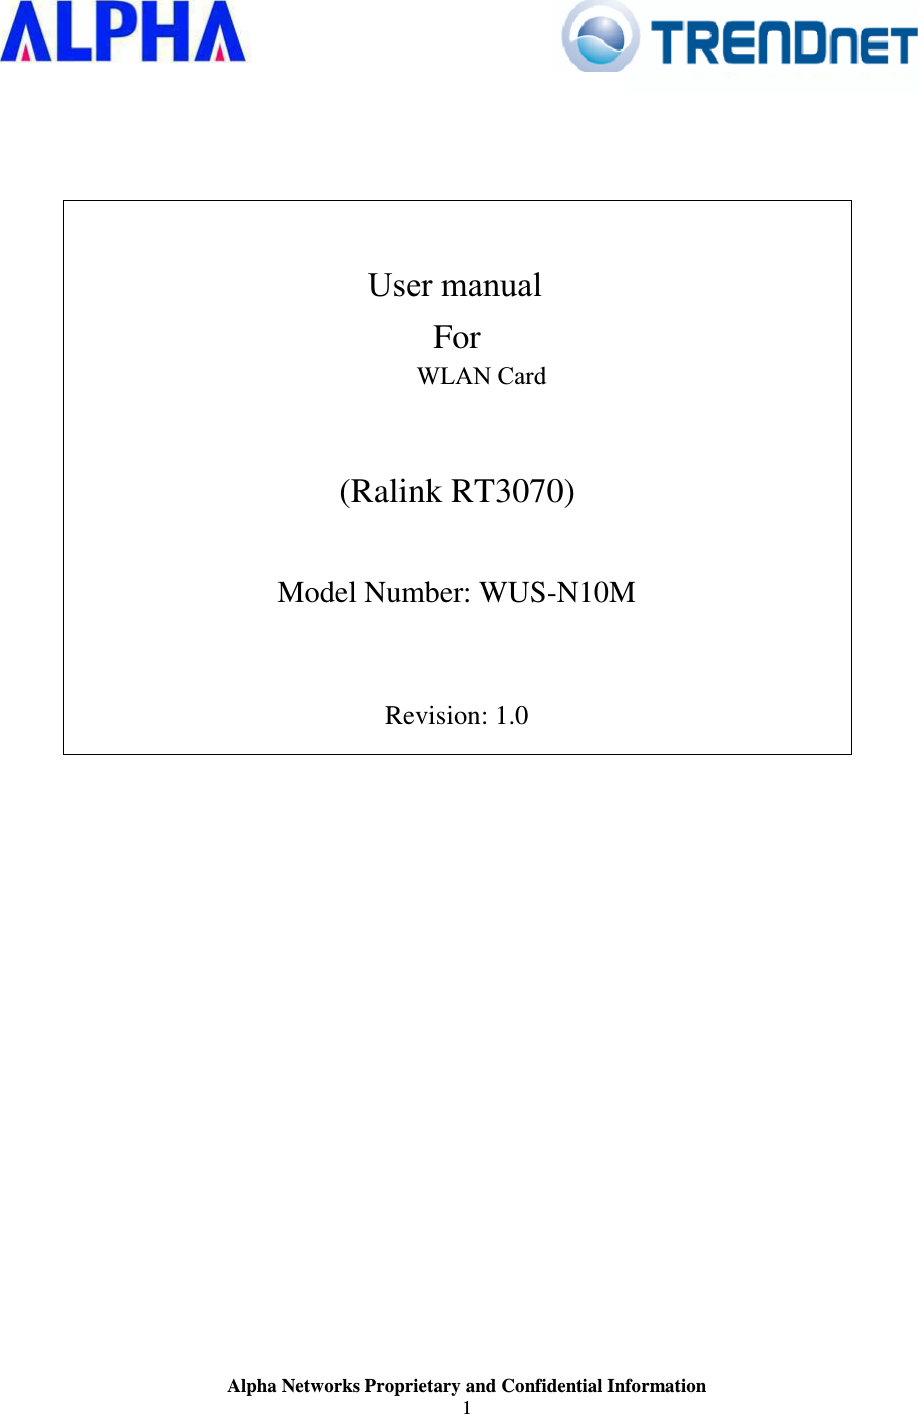                    Alpha Networks Proprietary and Confidential Information 1                        User manual For 802.11b/g/n USB Adapter  (Ralink RT3070)  Model Number: WUS-N10M   Revision: 1.0                            WLAN Card